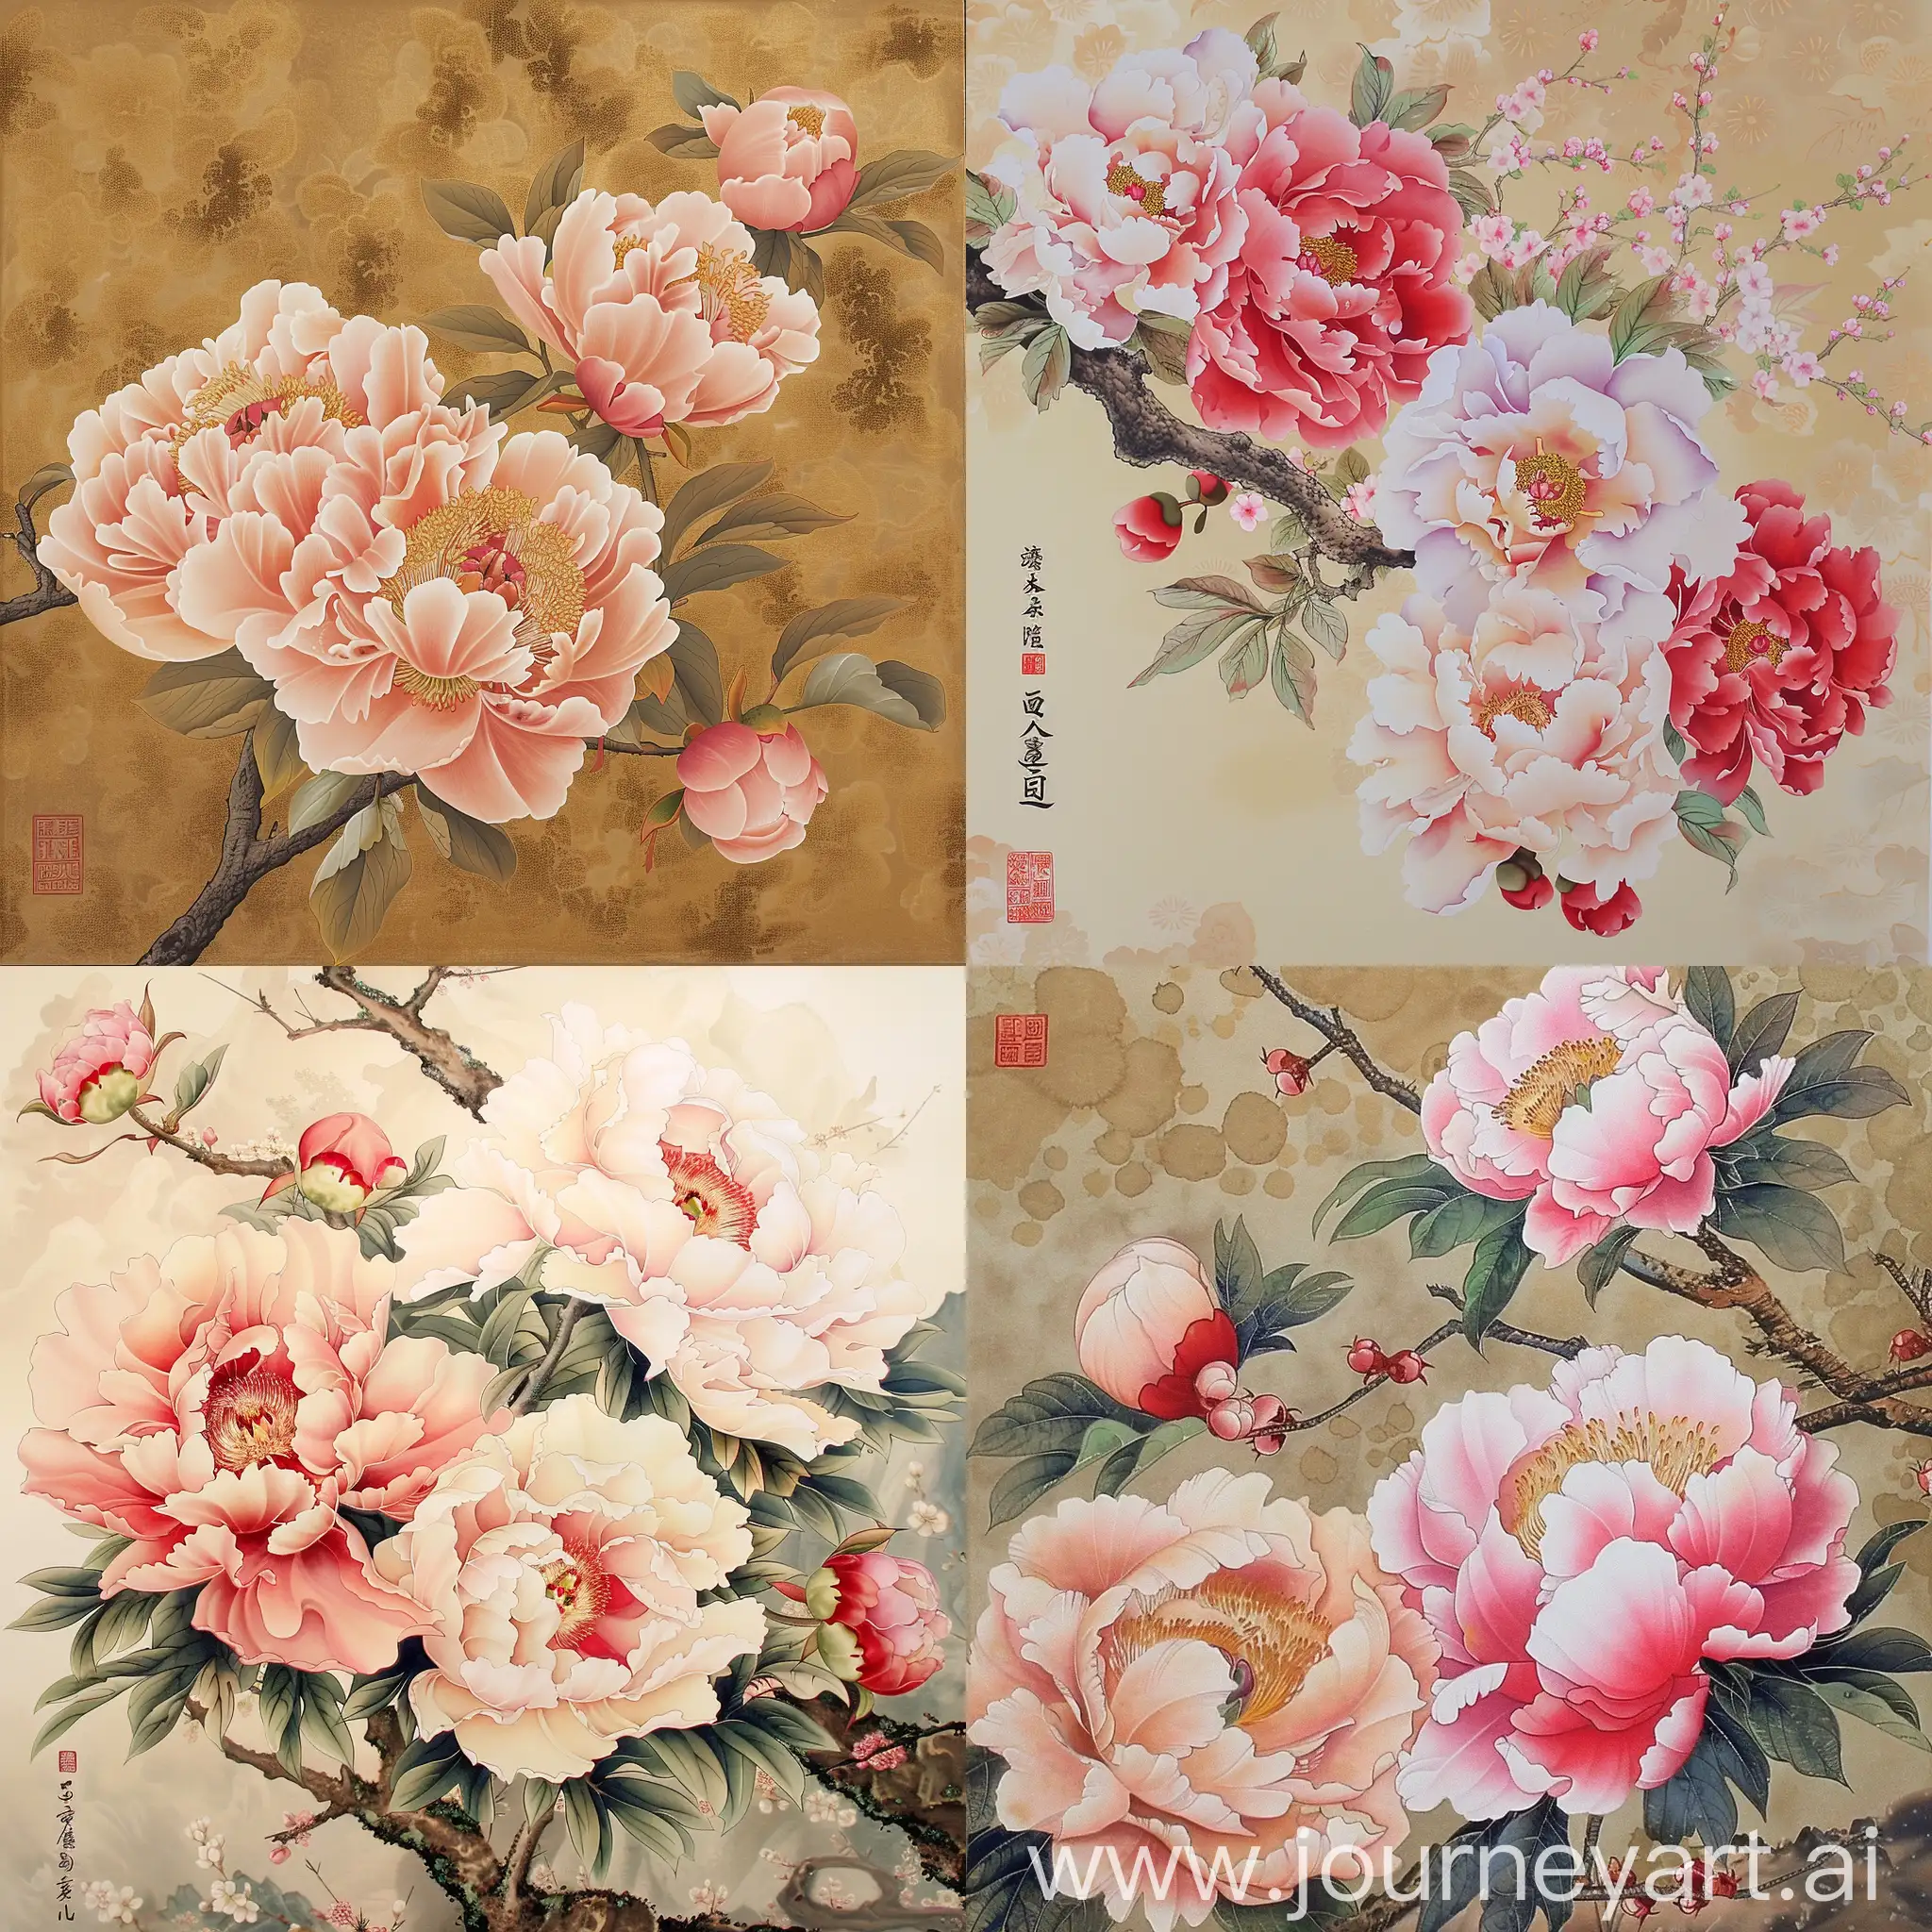 Prosperous-Peony-and-Plum-Blossom-Design-Symbolizing-Wealth-and-Good-Fortune